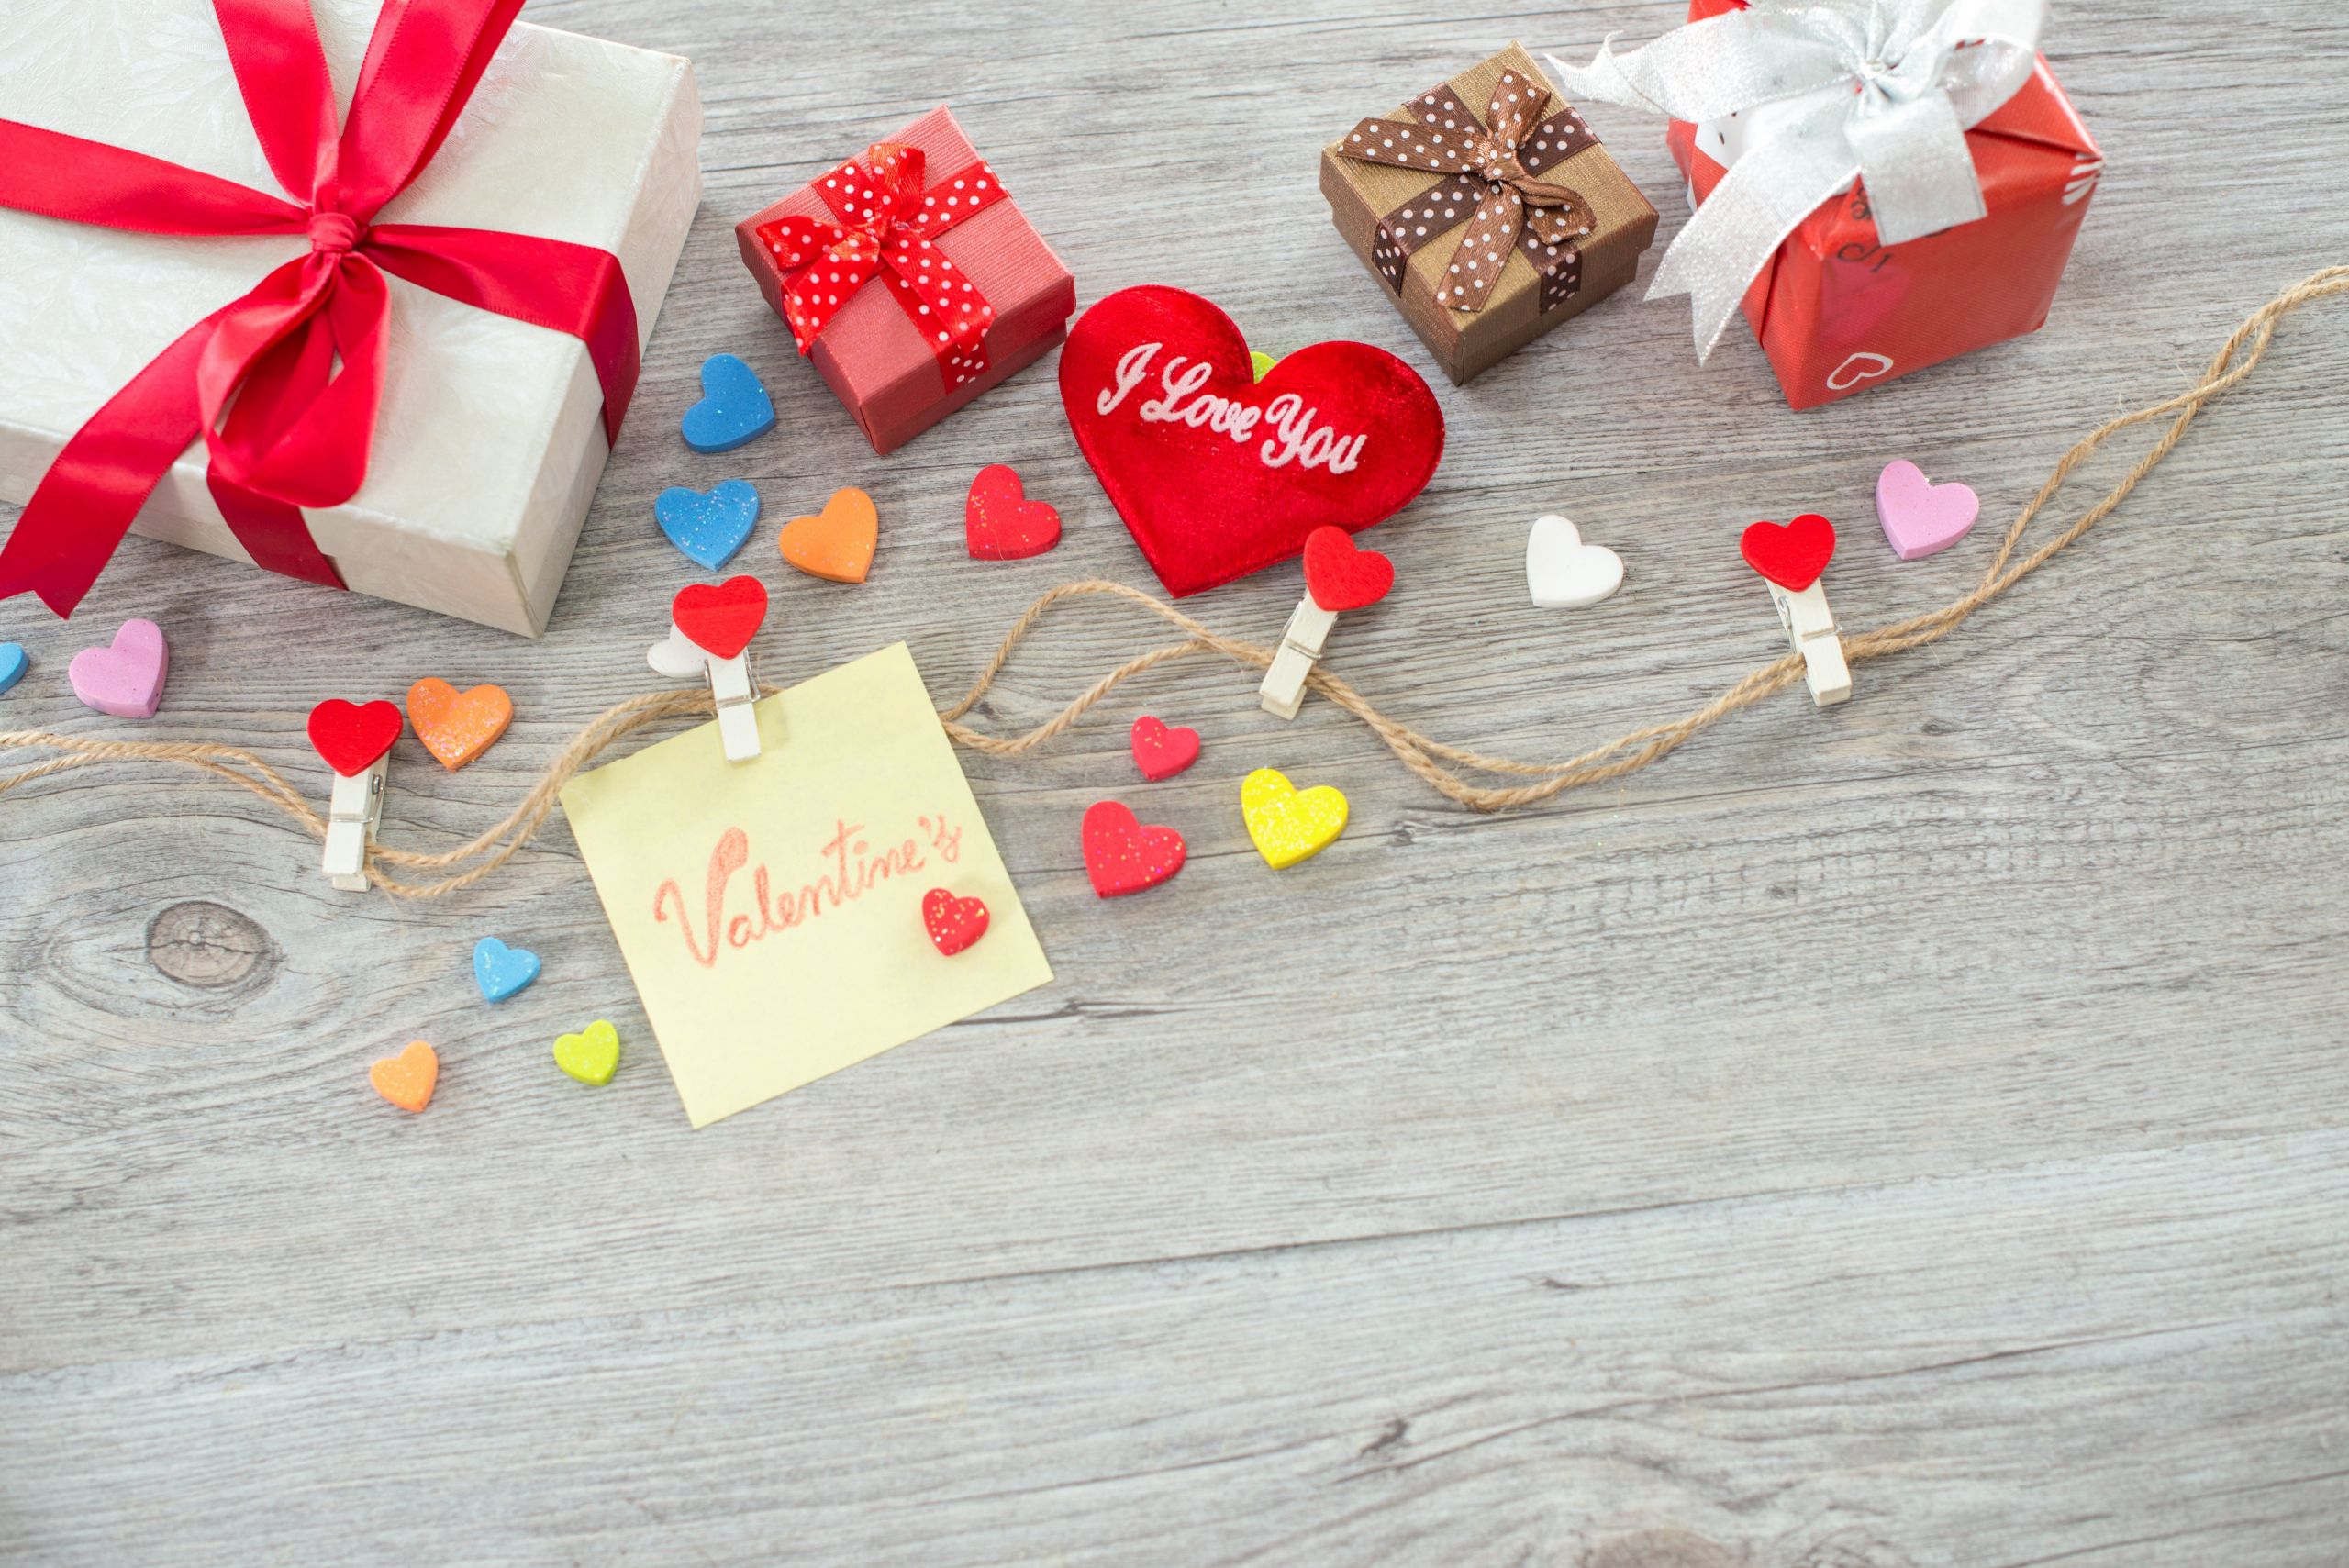 Cute Ideas for Valentines Day for Her Awesome 20 Cute and Affordable Valentine S Day Gifts for Literally